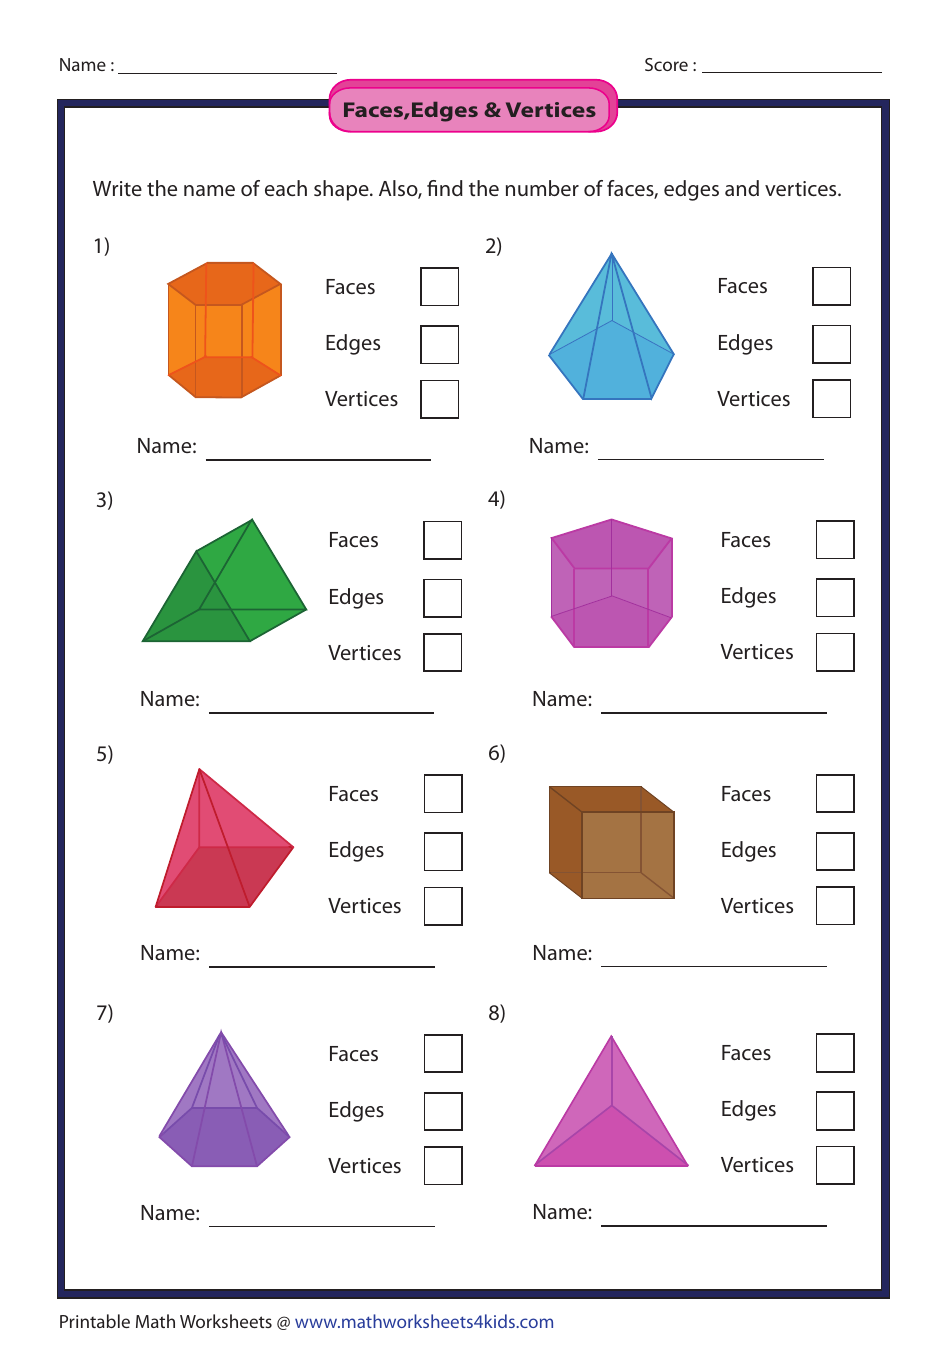 faces-edges-vertices-worksheet-6th-grade